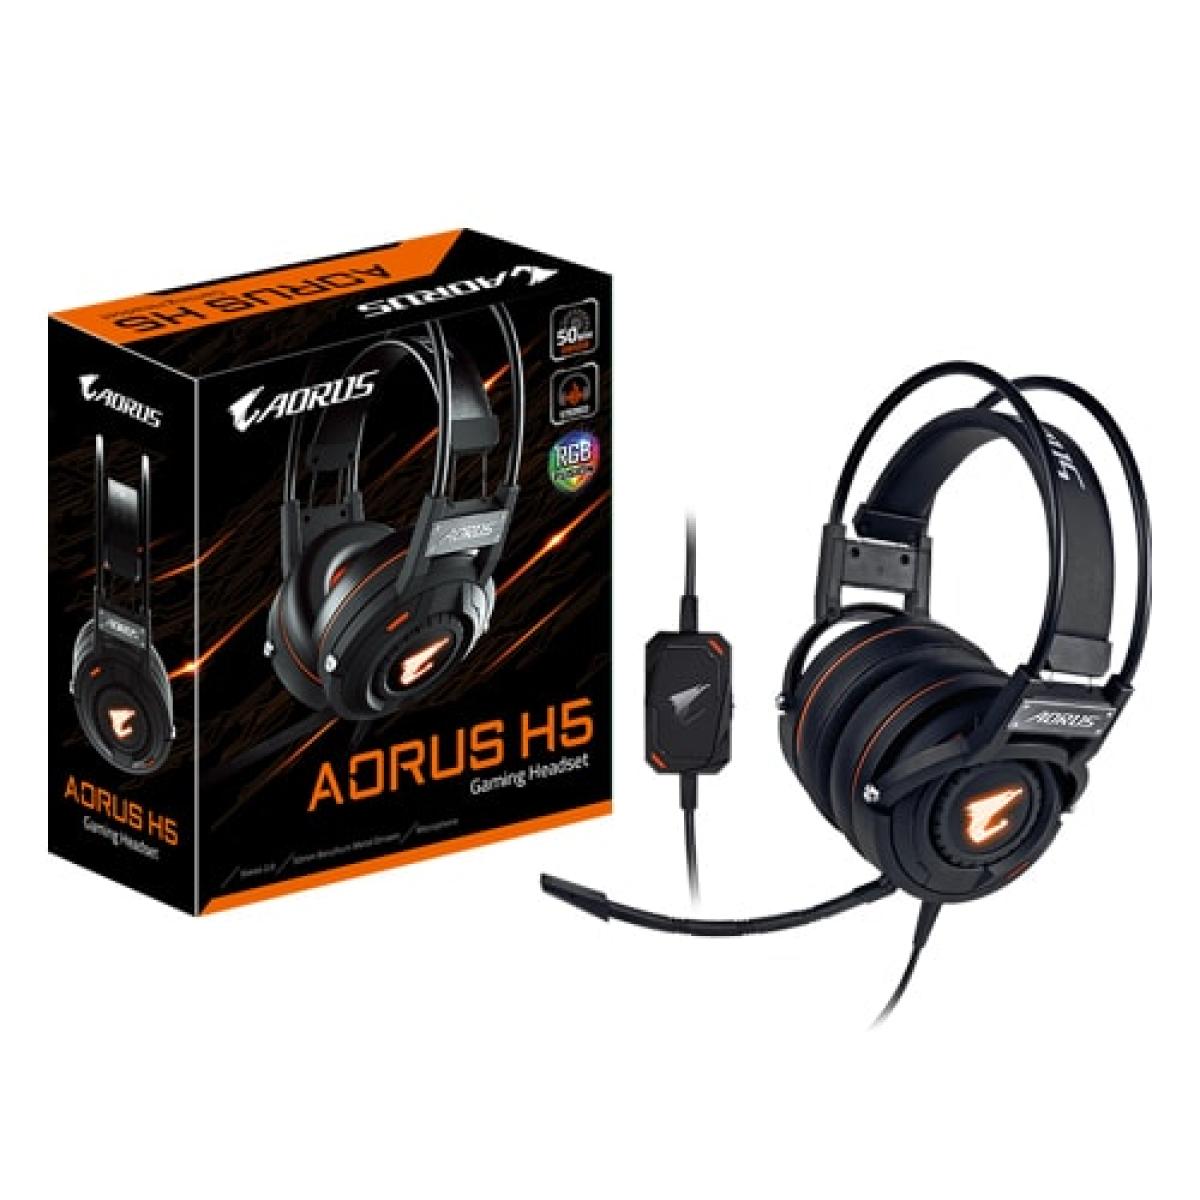 GIGABYTE AORUS H5 RGB Stereo Gaming Comfort Headset, Detachable and Bendable Microphone, In-line sound controls